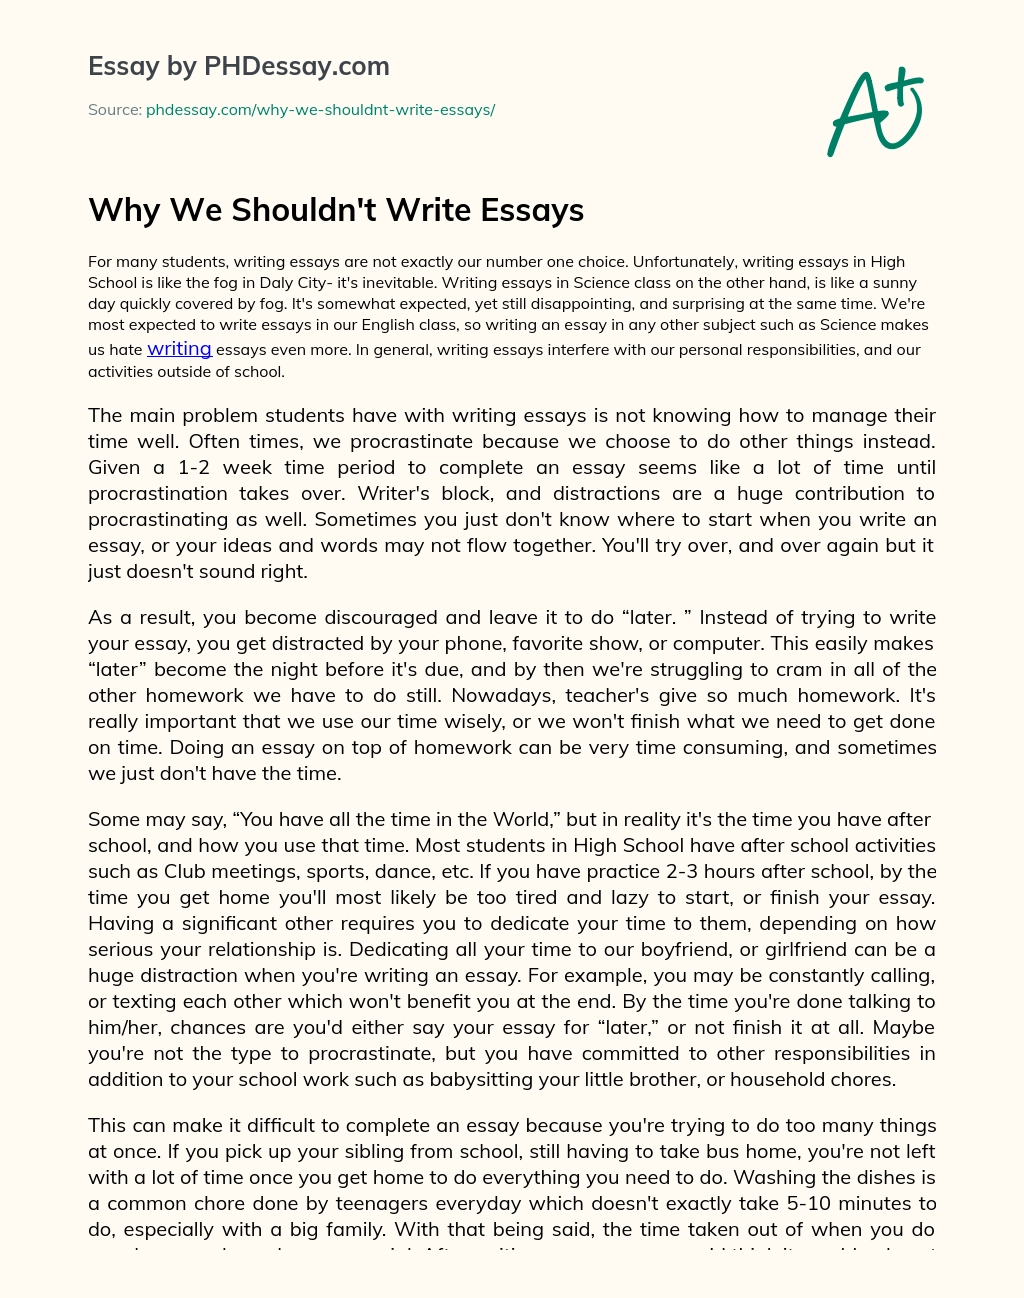 Moved: How to write an essay... - Everyday English Learning シ   Facebook